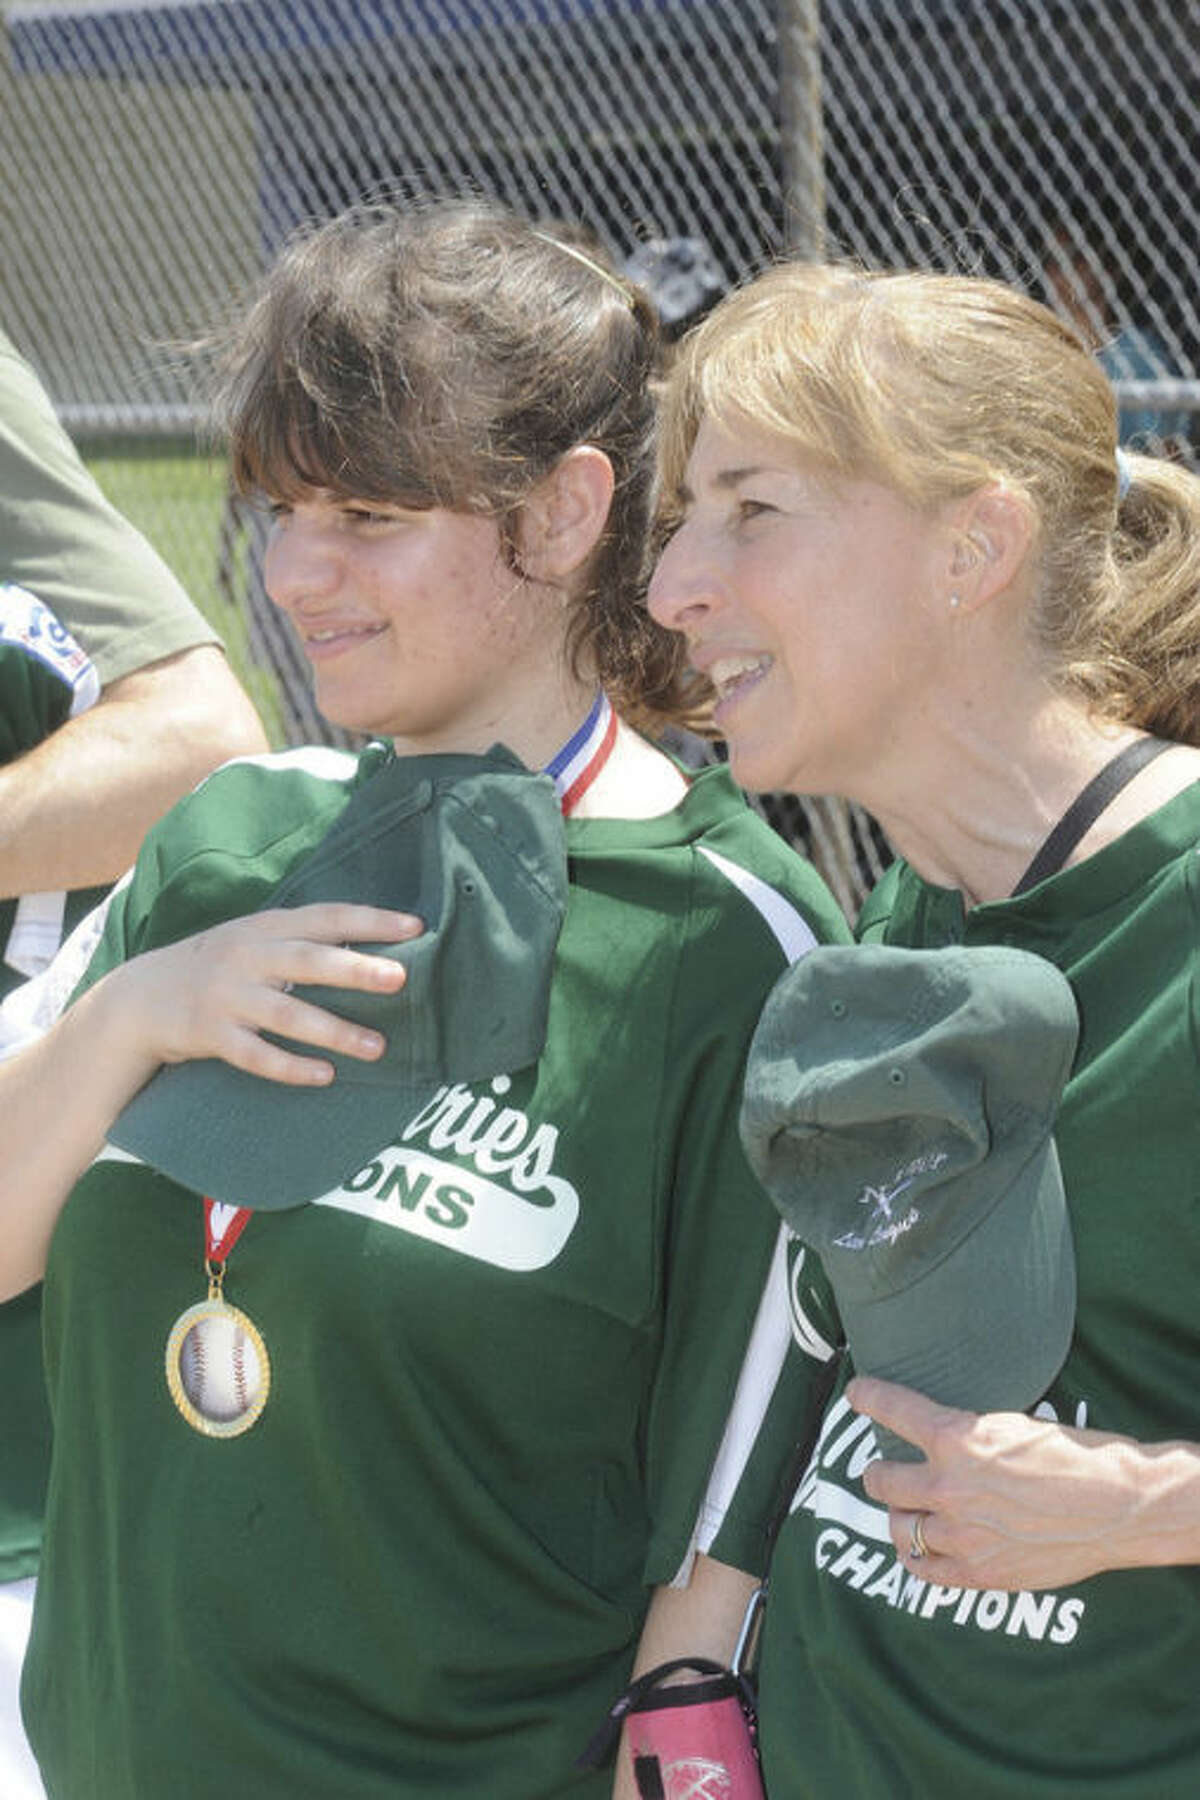 Coach Dawn Dinoto with her daughter Anisa who participated in the Norwalk little league challenger recognition day for athletes with special needs on Sunday in Norwalk. Hour photo/Matthew Vinci